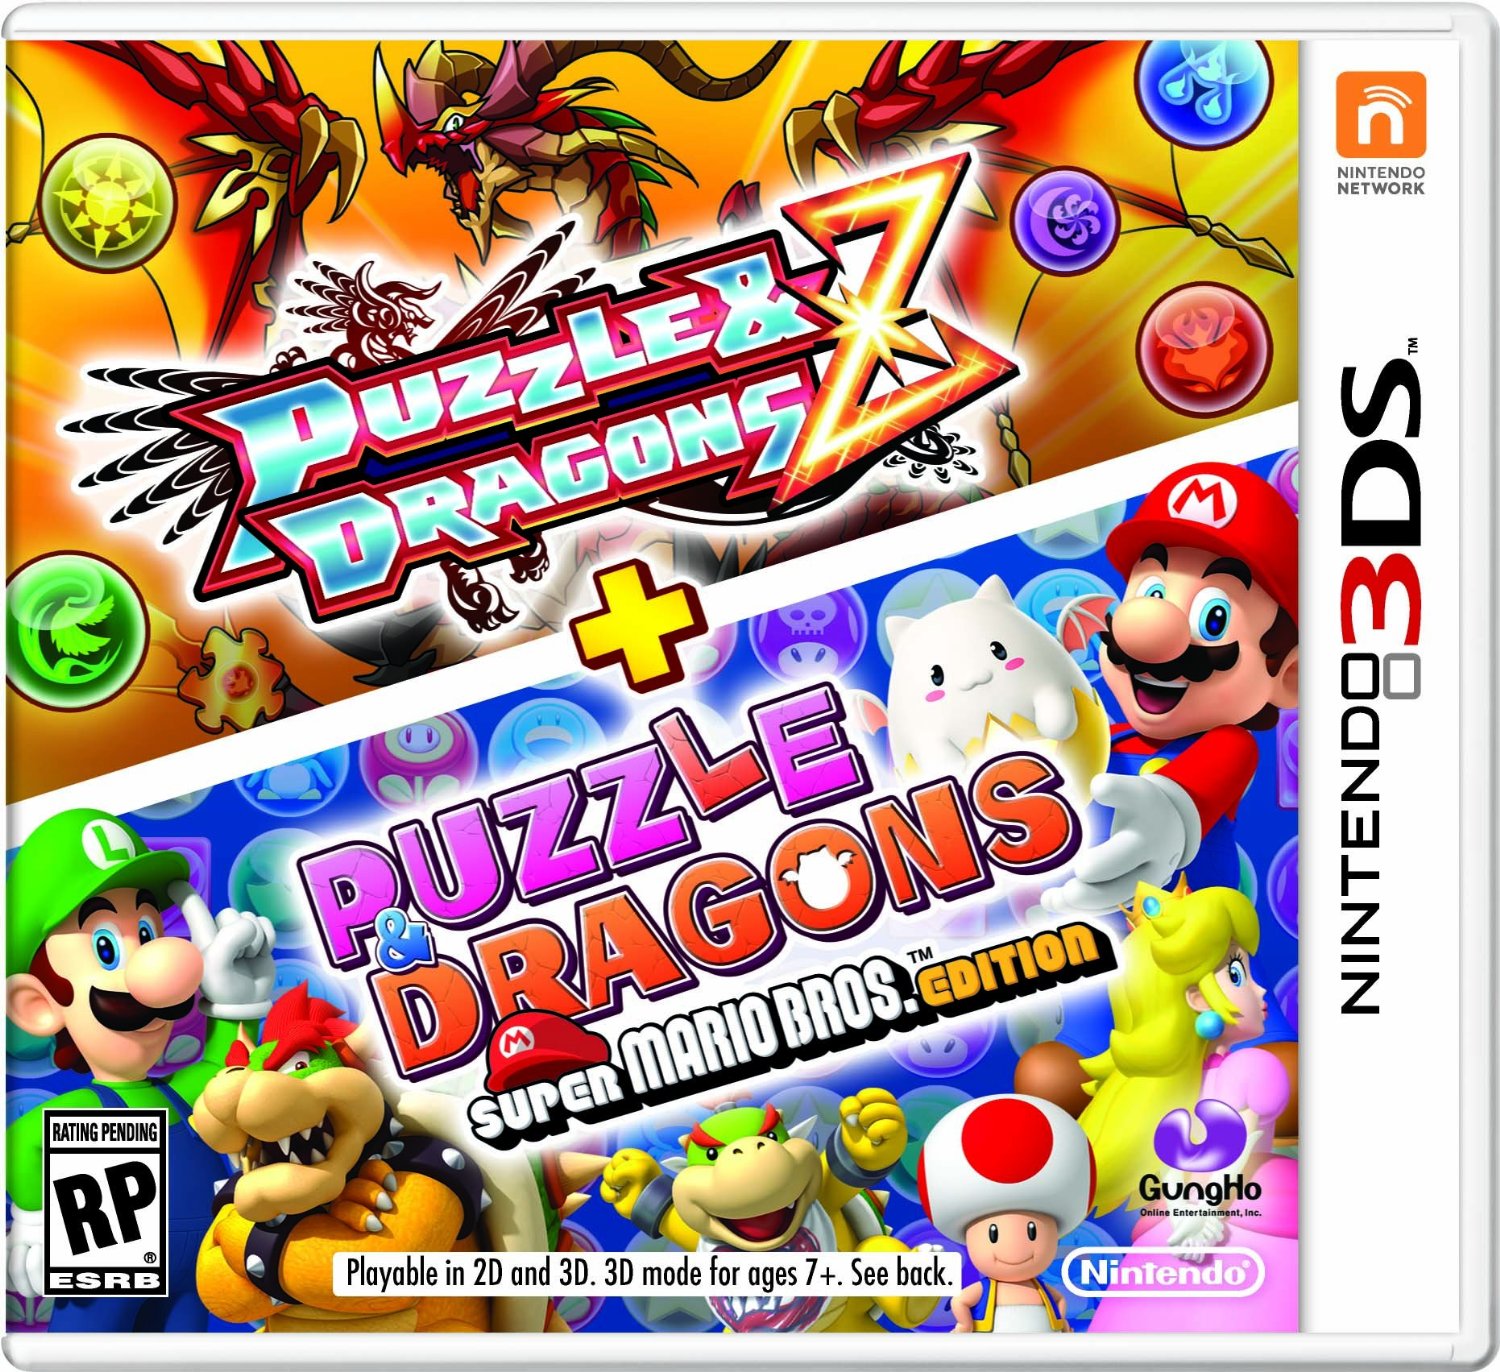 Puzzle and Dragons Z + Super Mario Bros. Edition – Hands On